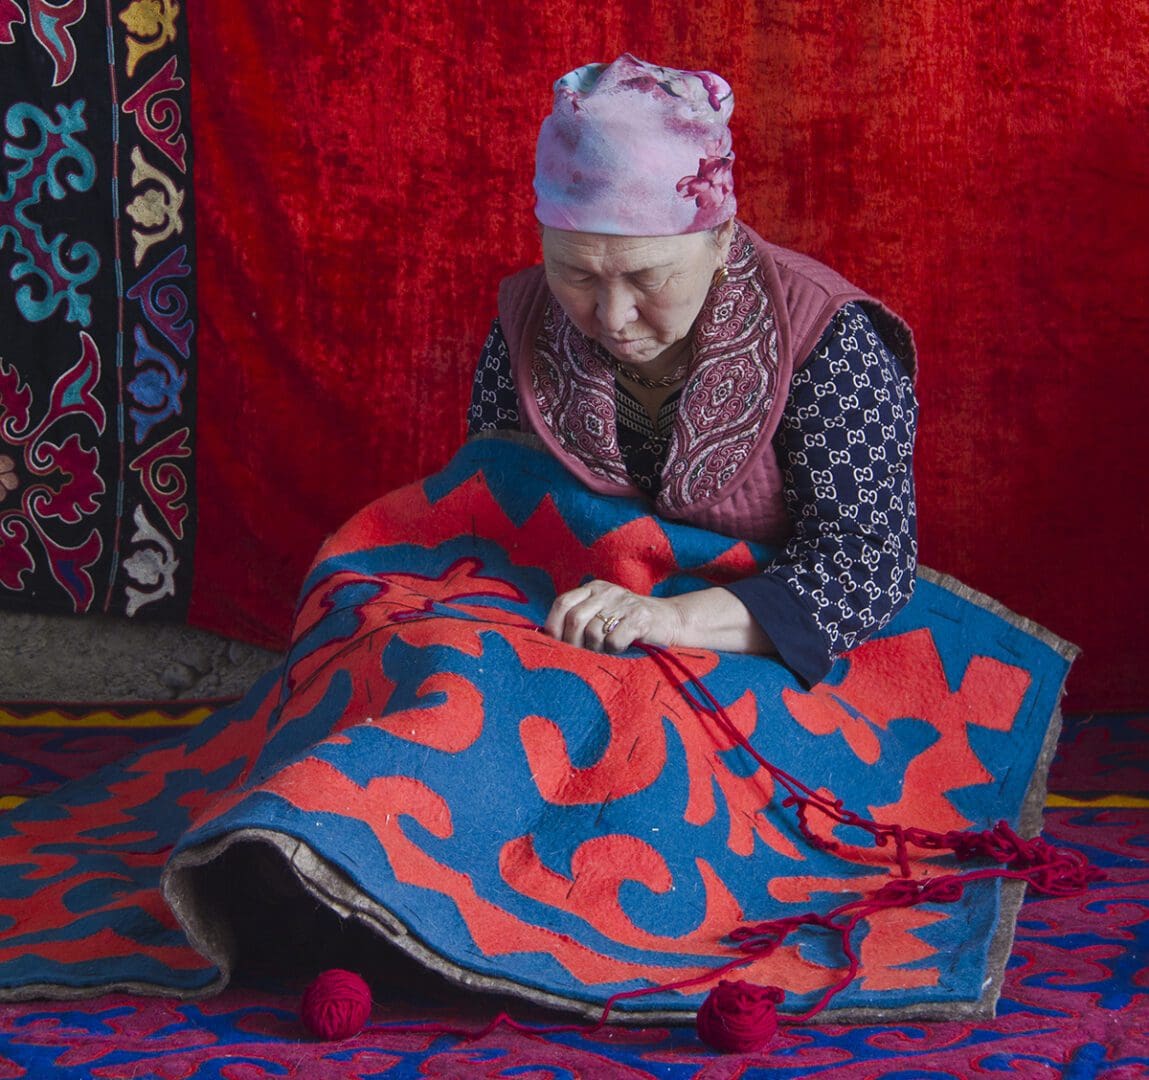 A woman is making a rug on the floor.